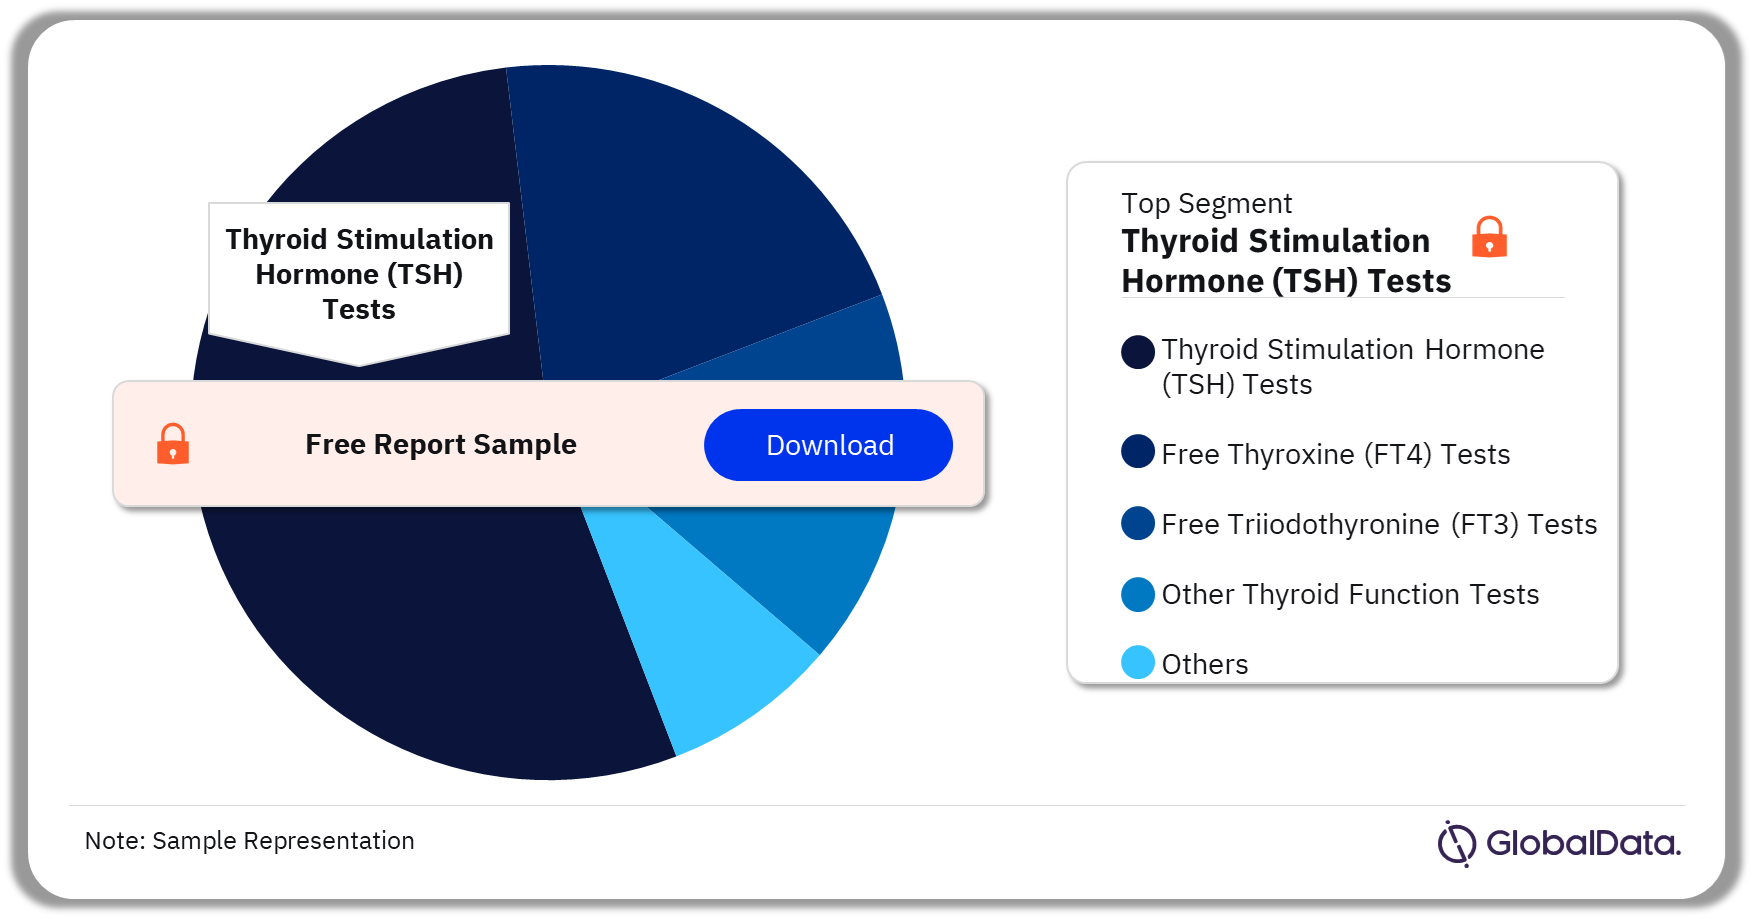 Thyroid Function Tests Market Analysis by Segments, 2023 (%)